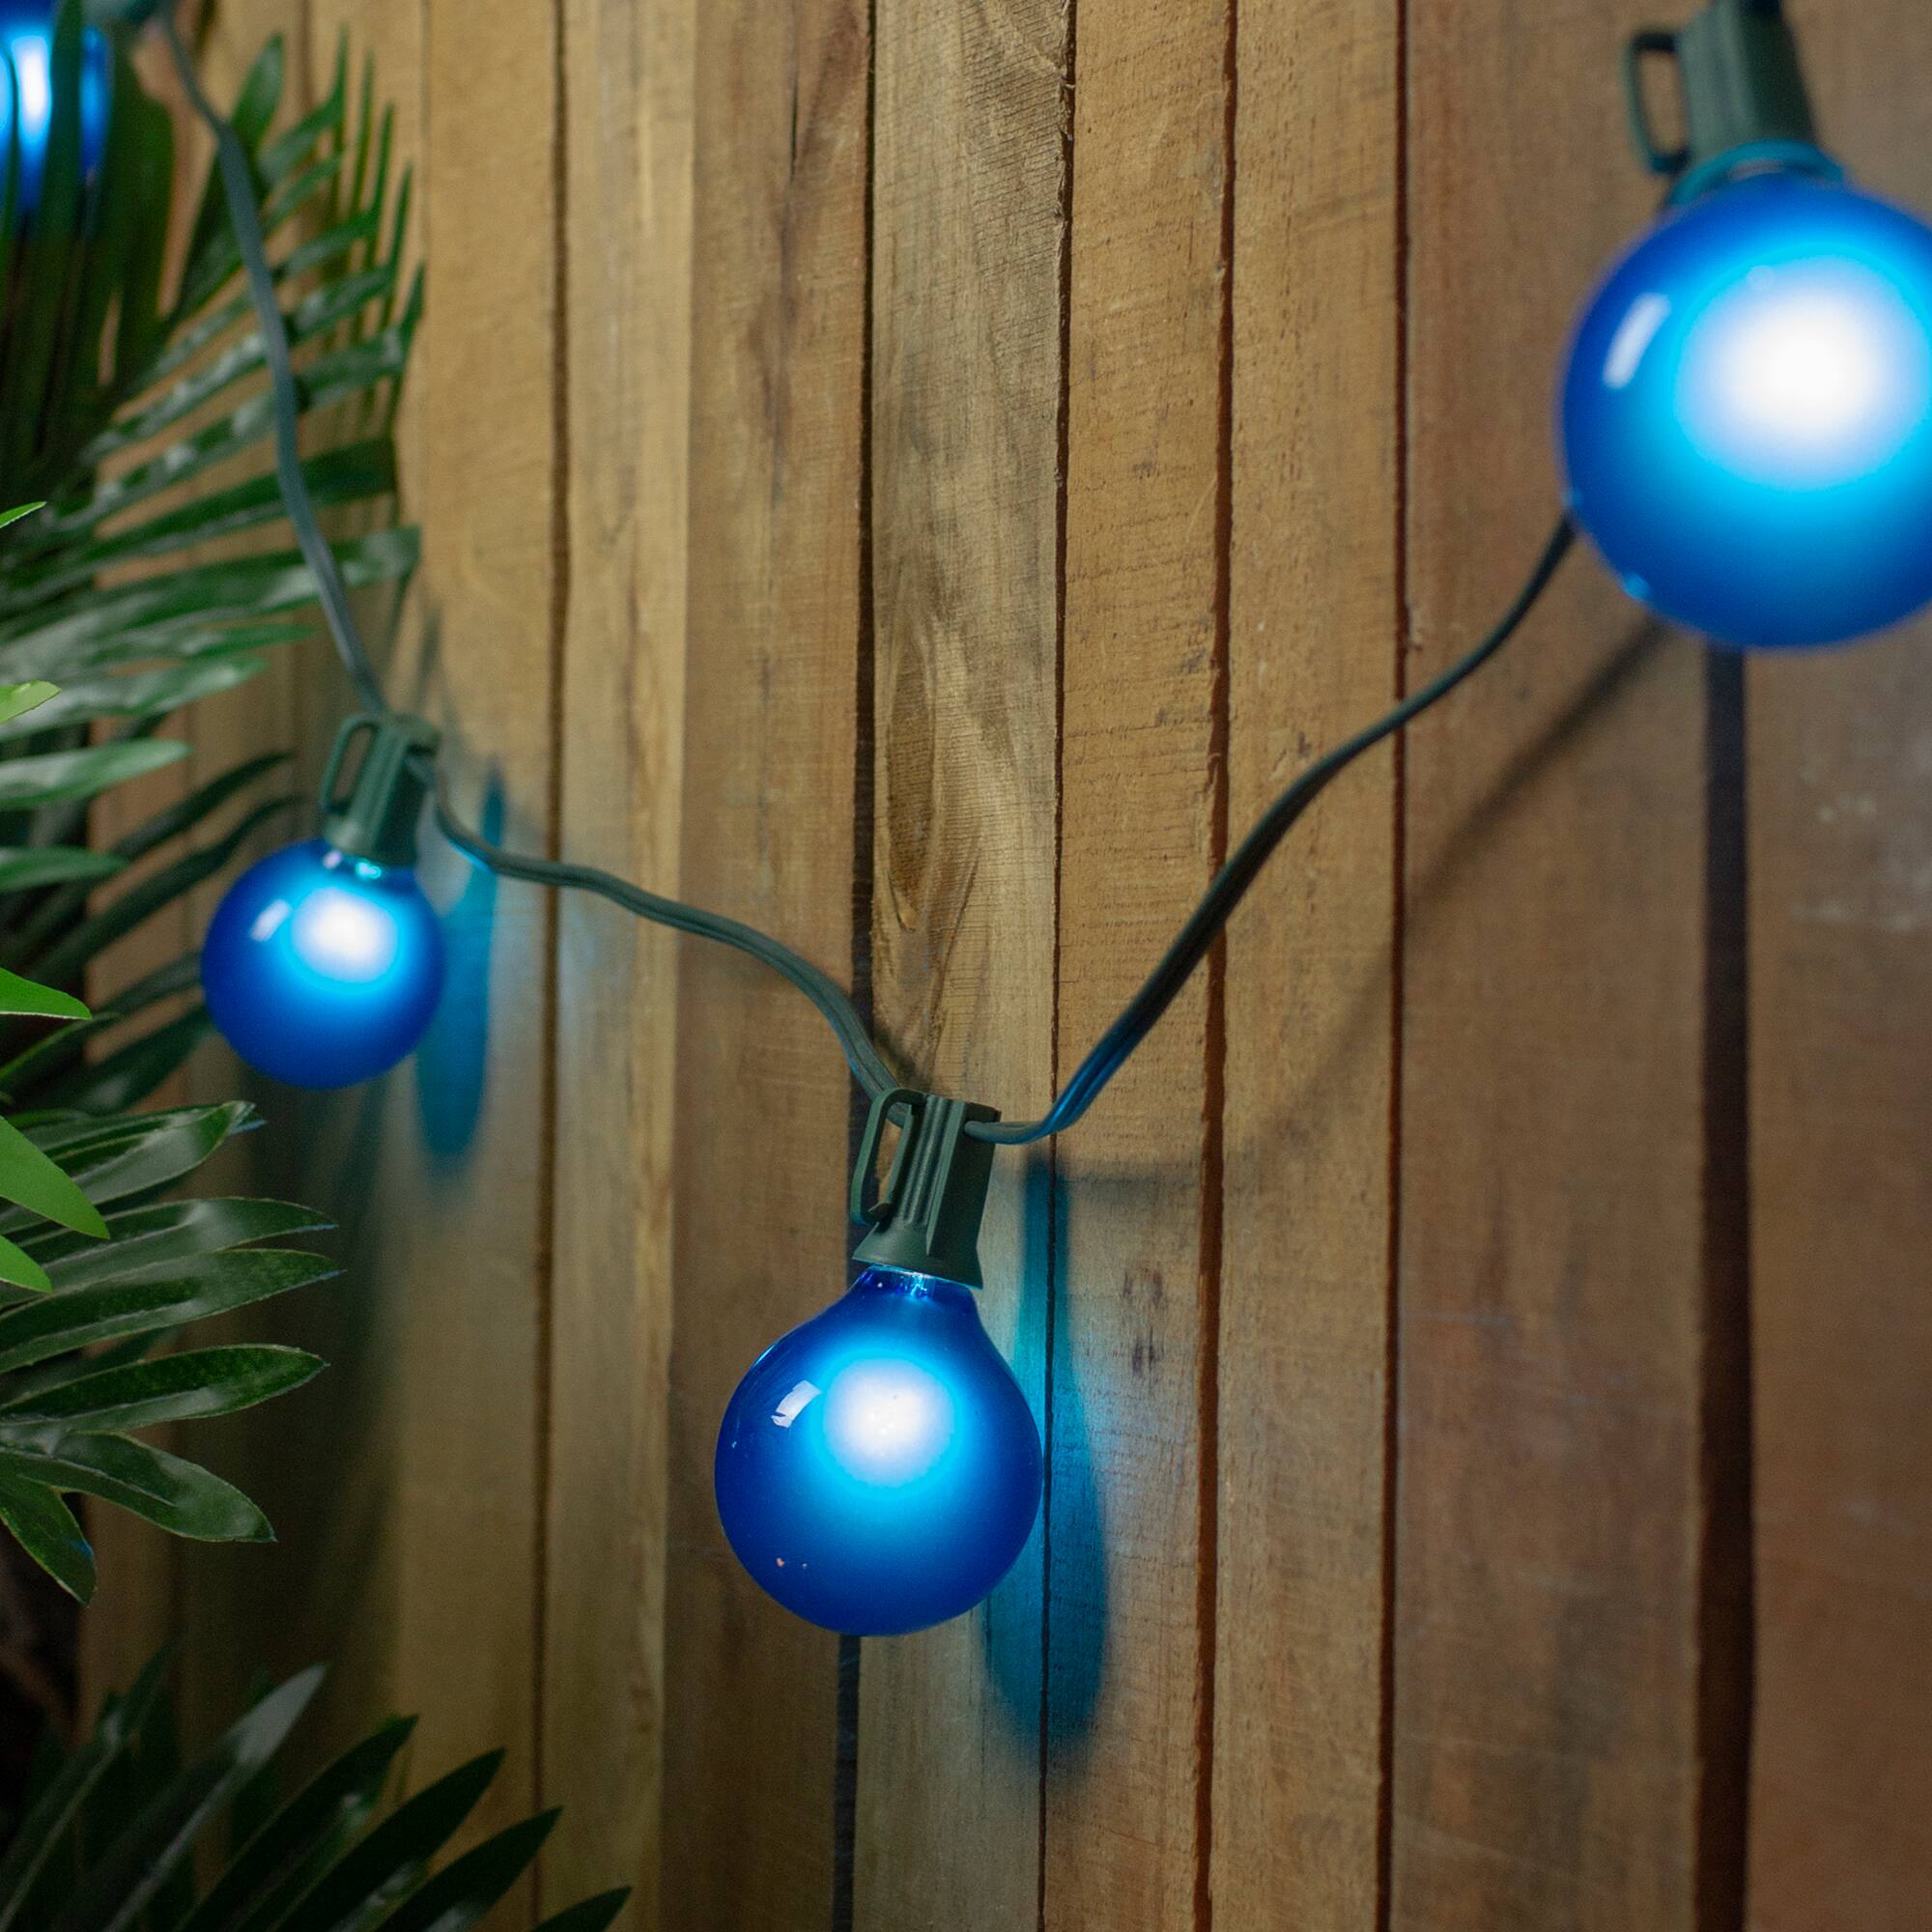 15ct. Blue Satin G50 Globe Christmas String Lights with Green Wire